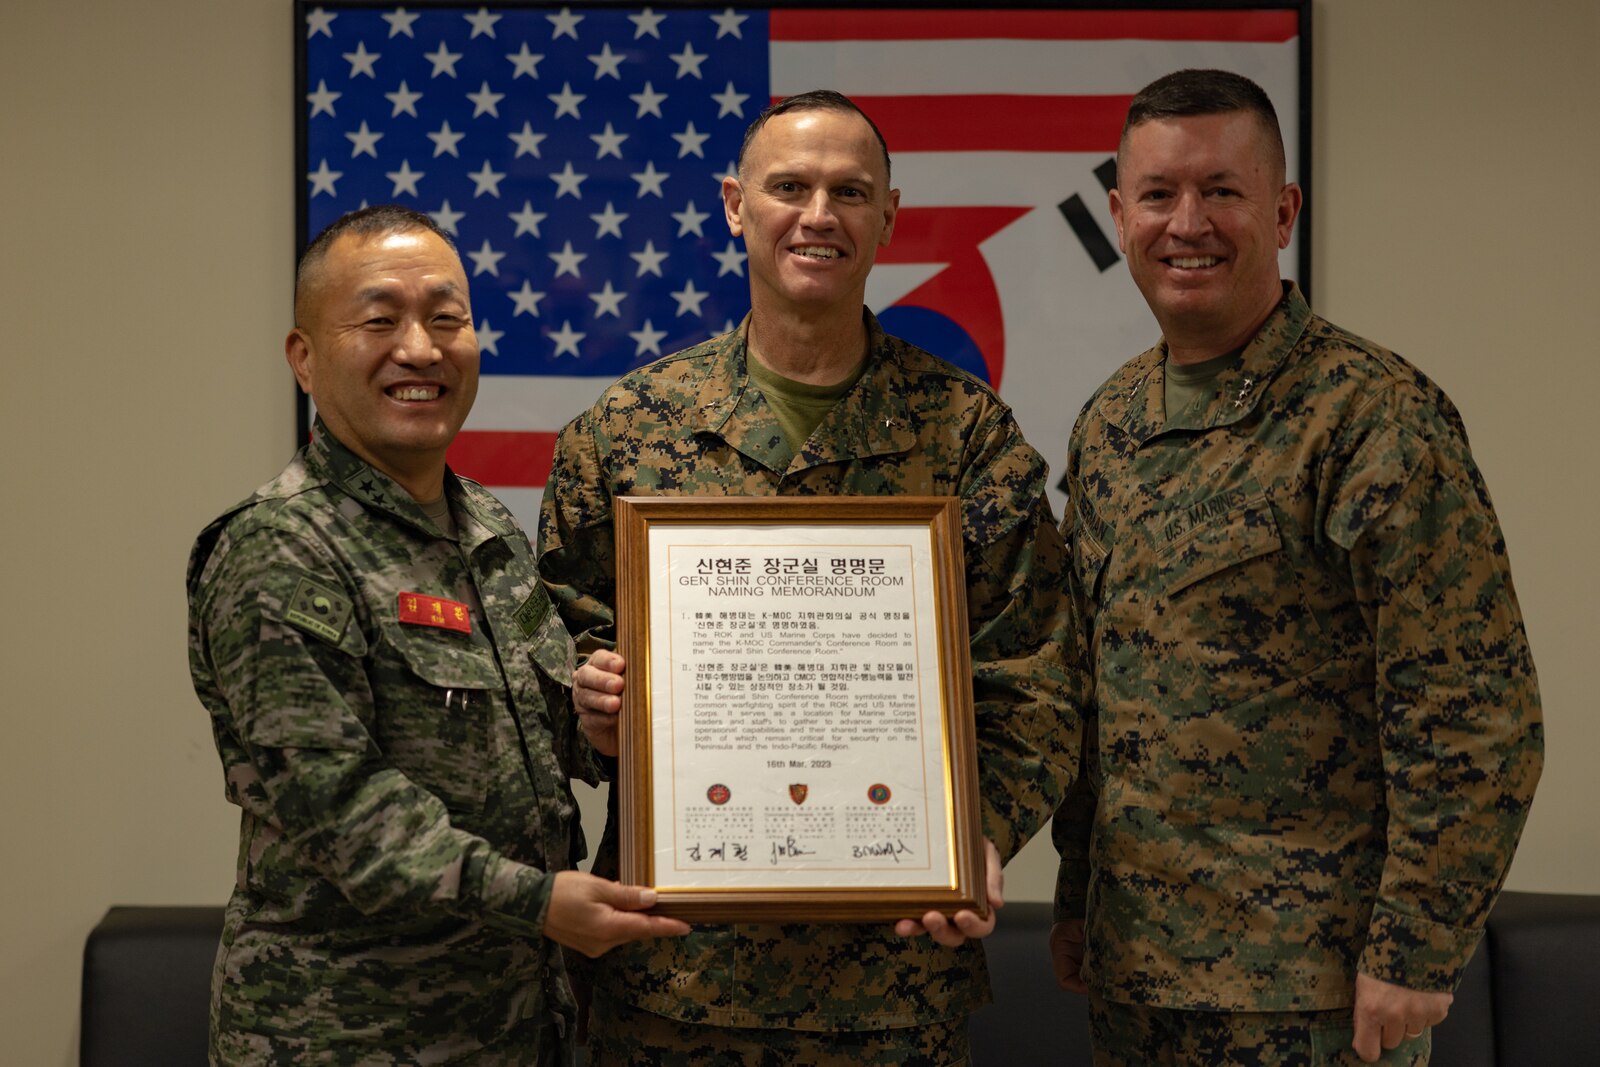 The commander’s conference room was named in honor of ROK Marine Corps Lt. Gen. Shin Hyun-Joon, the first commandant and founder of the ROK Marine Corps. The dedication ceremony represents the strength and brotherhood of the ROK-U.S. Marine Corps alliance. (U.S. Marine Corps photo by Lance Cpl. Tyler Andrews)